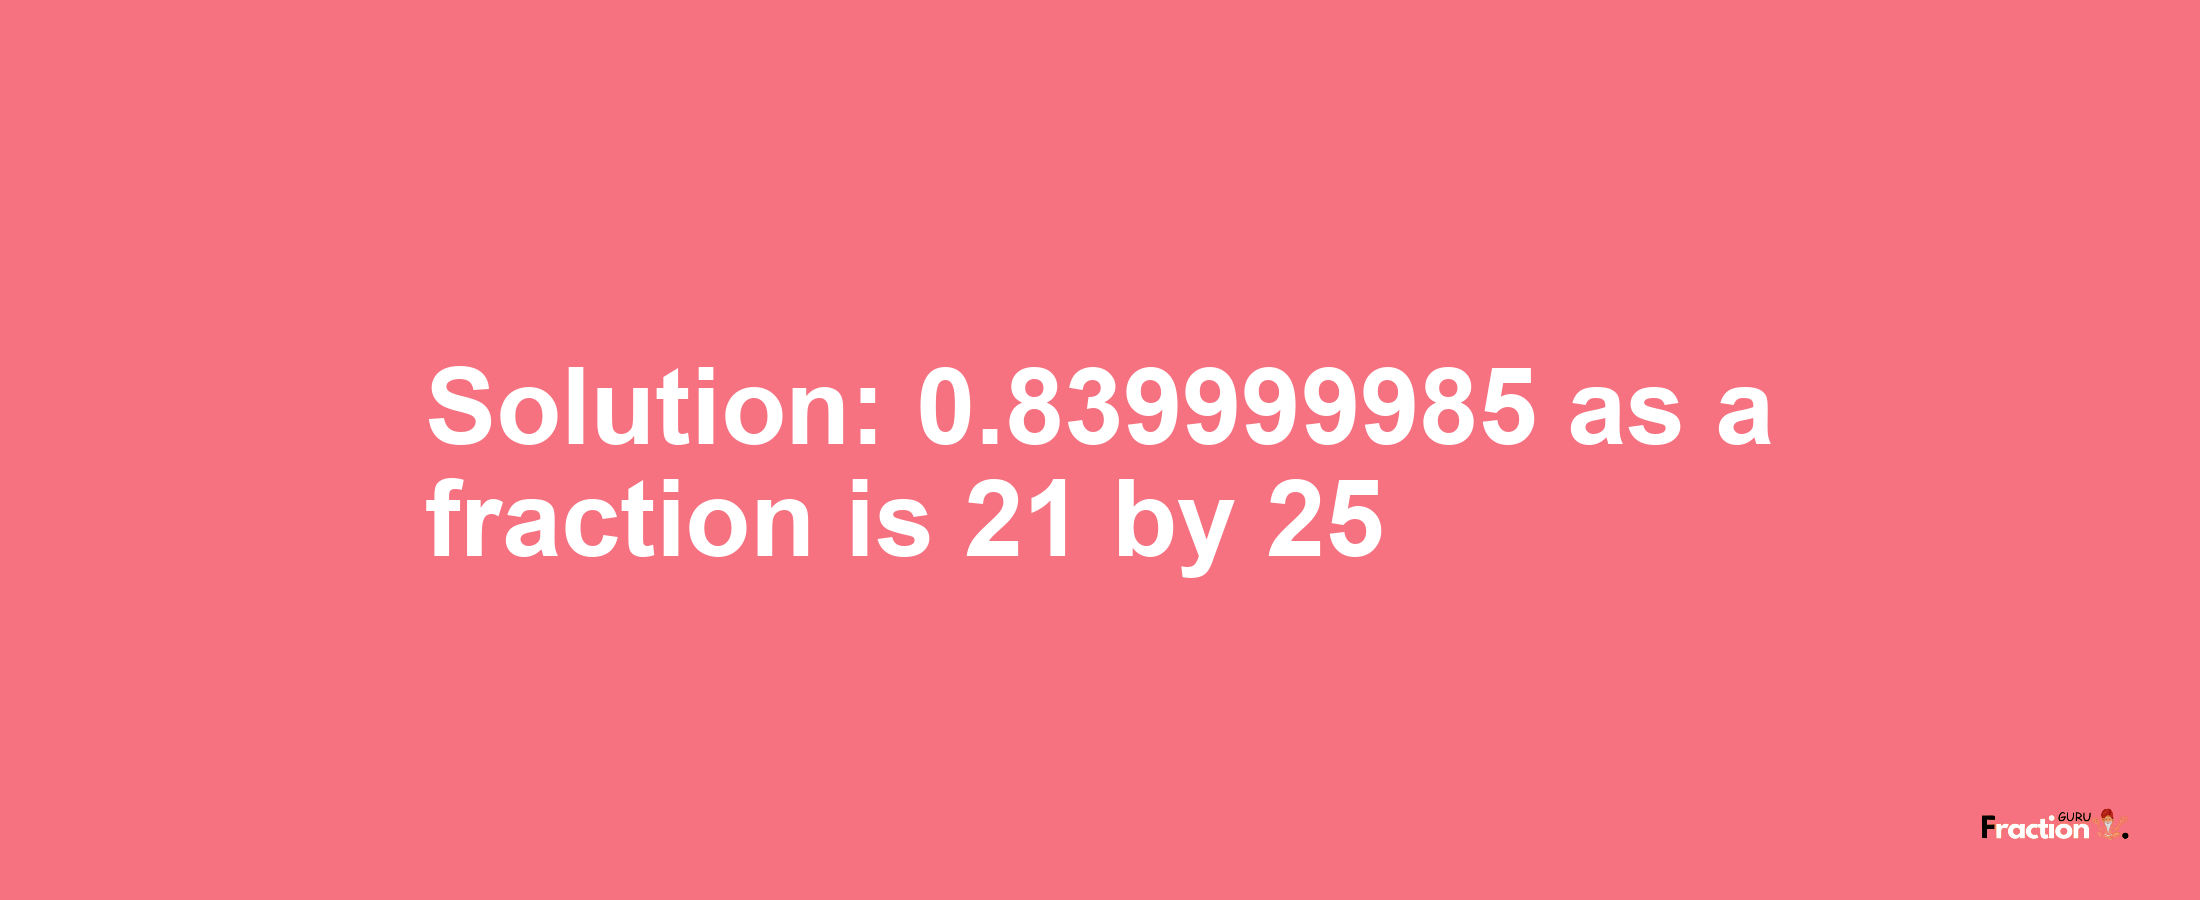 Solution:0.839999985 as a fraction is 21/25